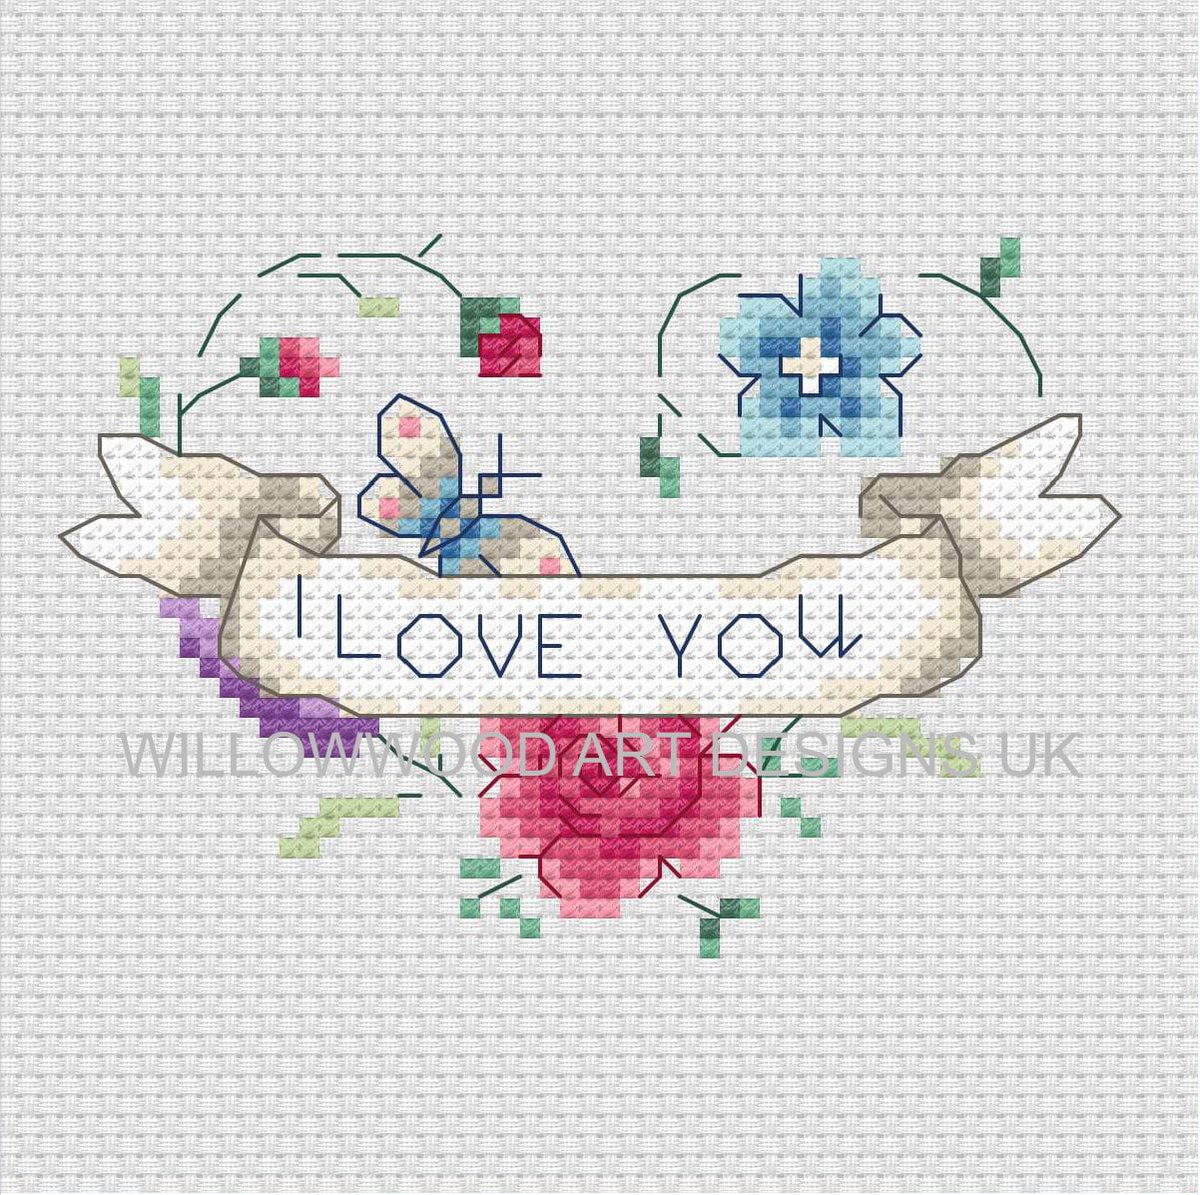 Ideal for Mothers Day Heart 'I Love You' Easy Cross Stitch Design, DMC, 18 Threads, 14/16 count, PDF Digital Download etsy.me/3h95hn0 #anniversary #bedroom #wall #homedecor #digitalcrossstitch #flowercrossstitch #heartcrossstitch #Mothersday